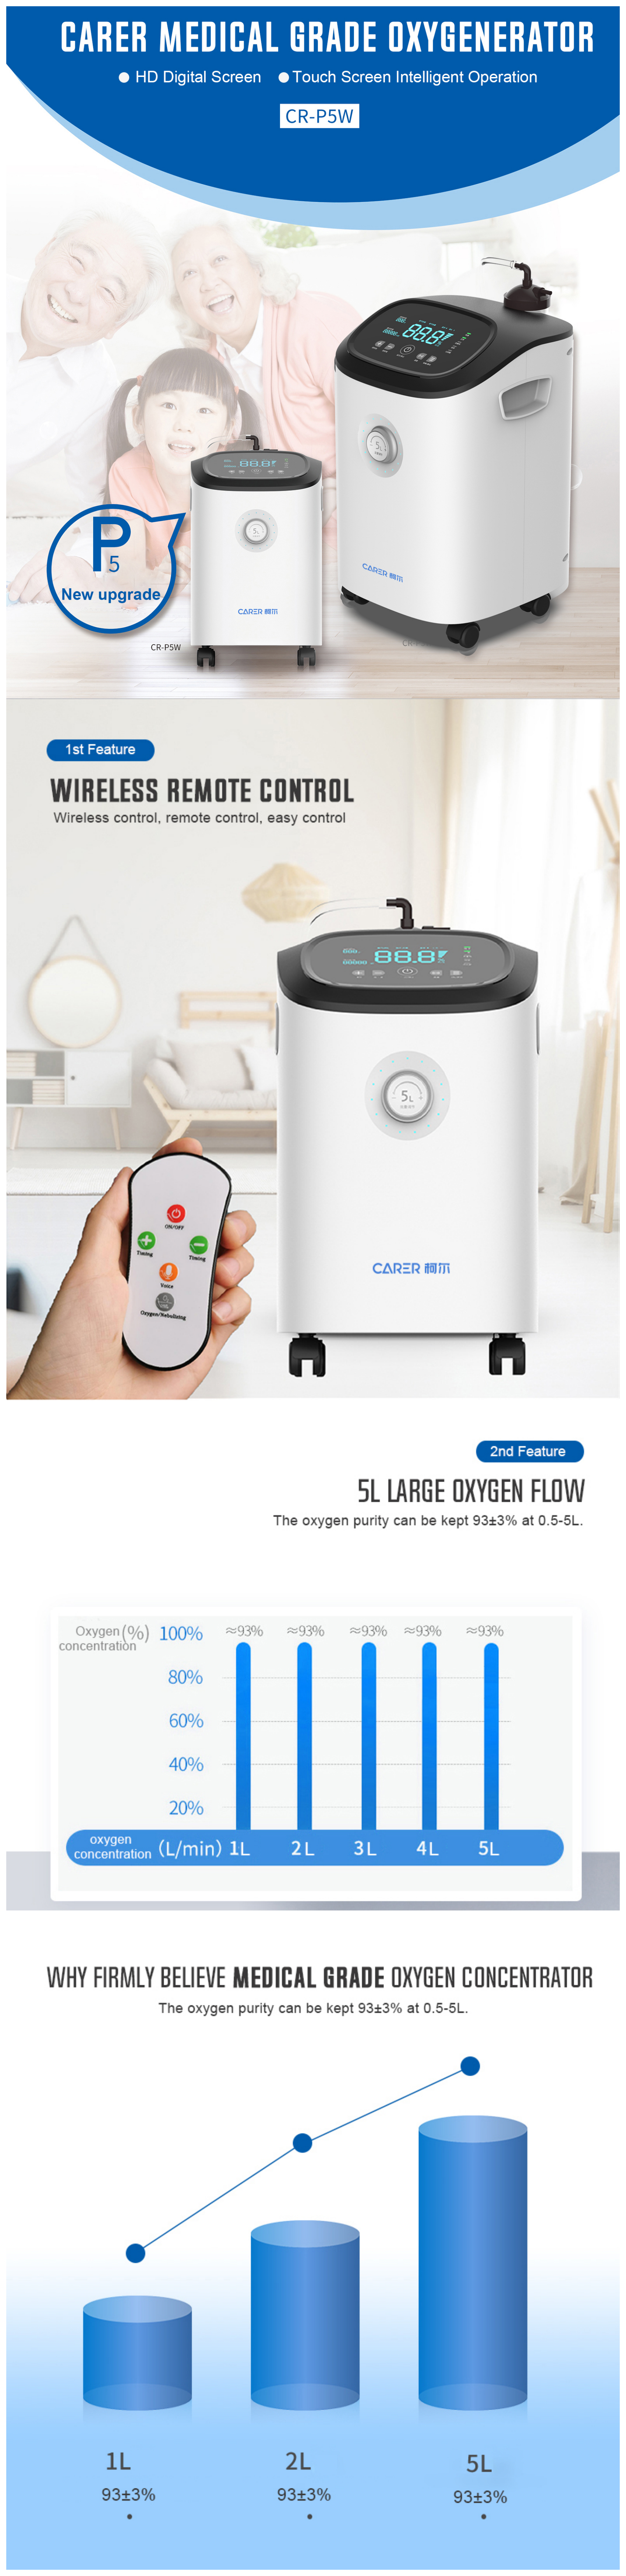 homeuse oxygen concentrator